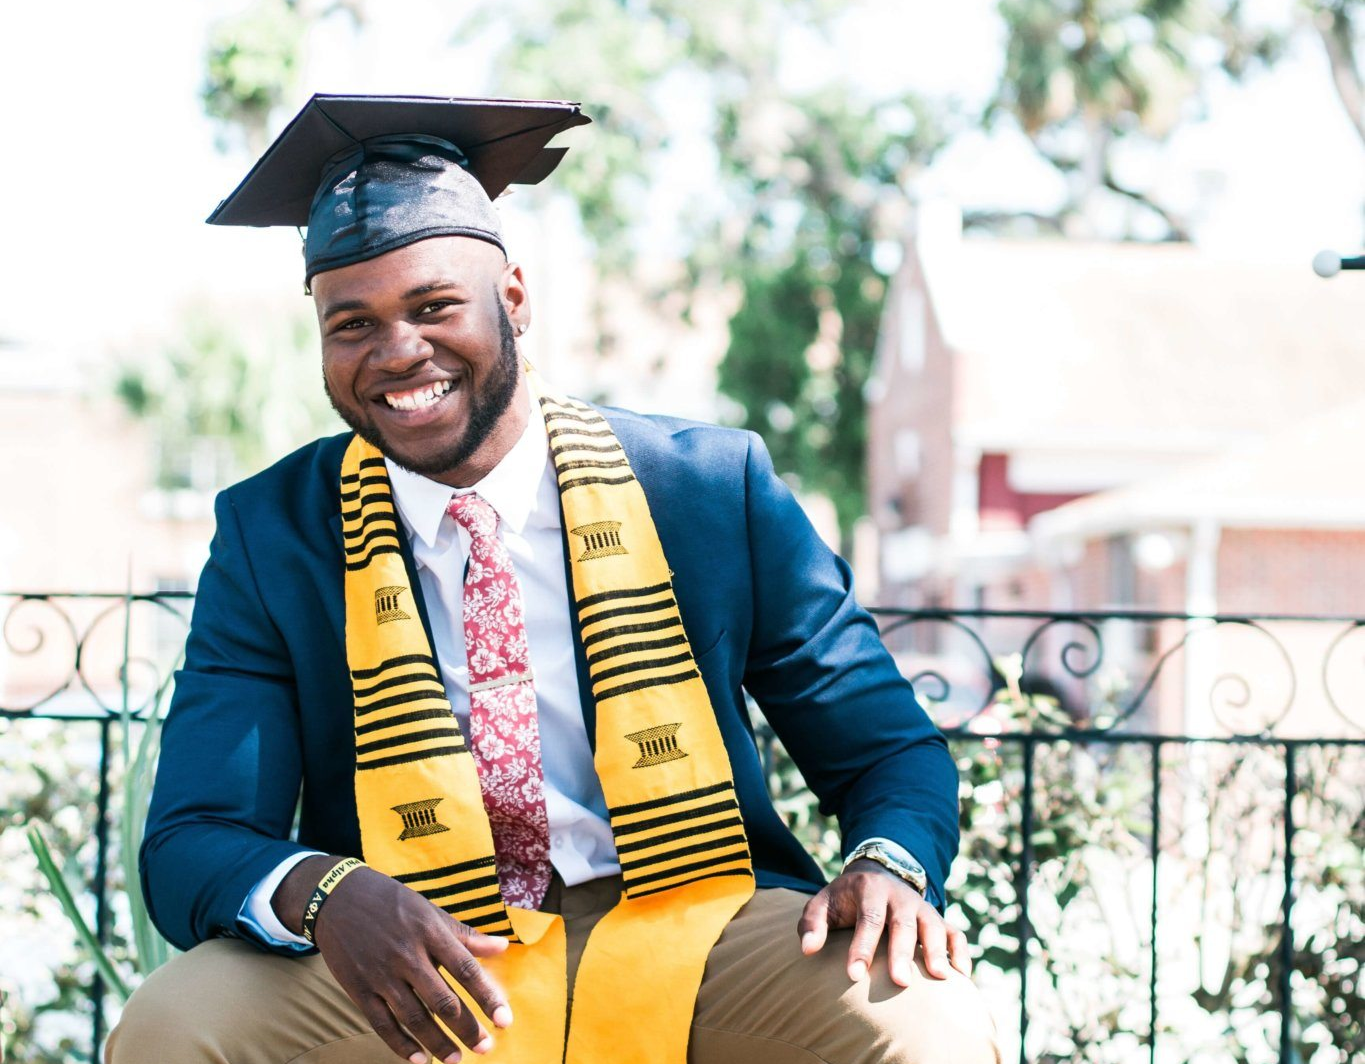 Black leaders will celebrate HBCU grads during "Show Me Your Walk HBCU Edition" Event